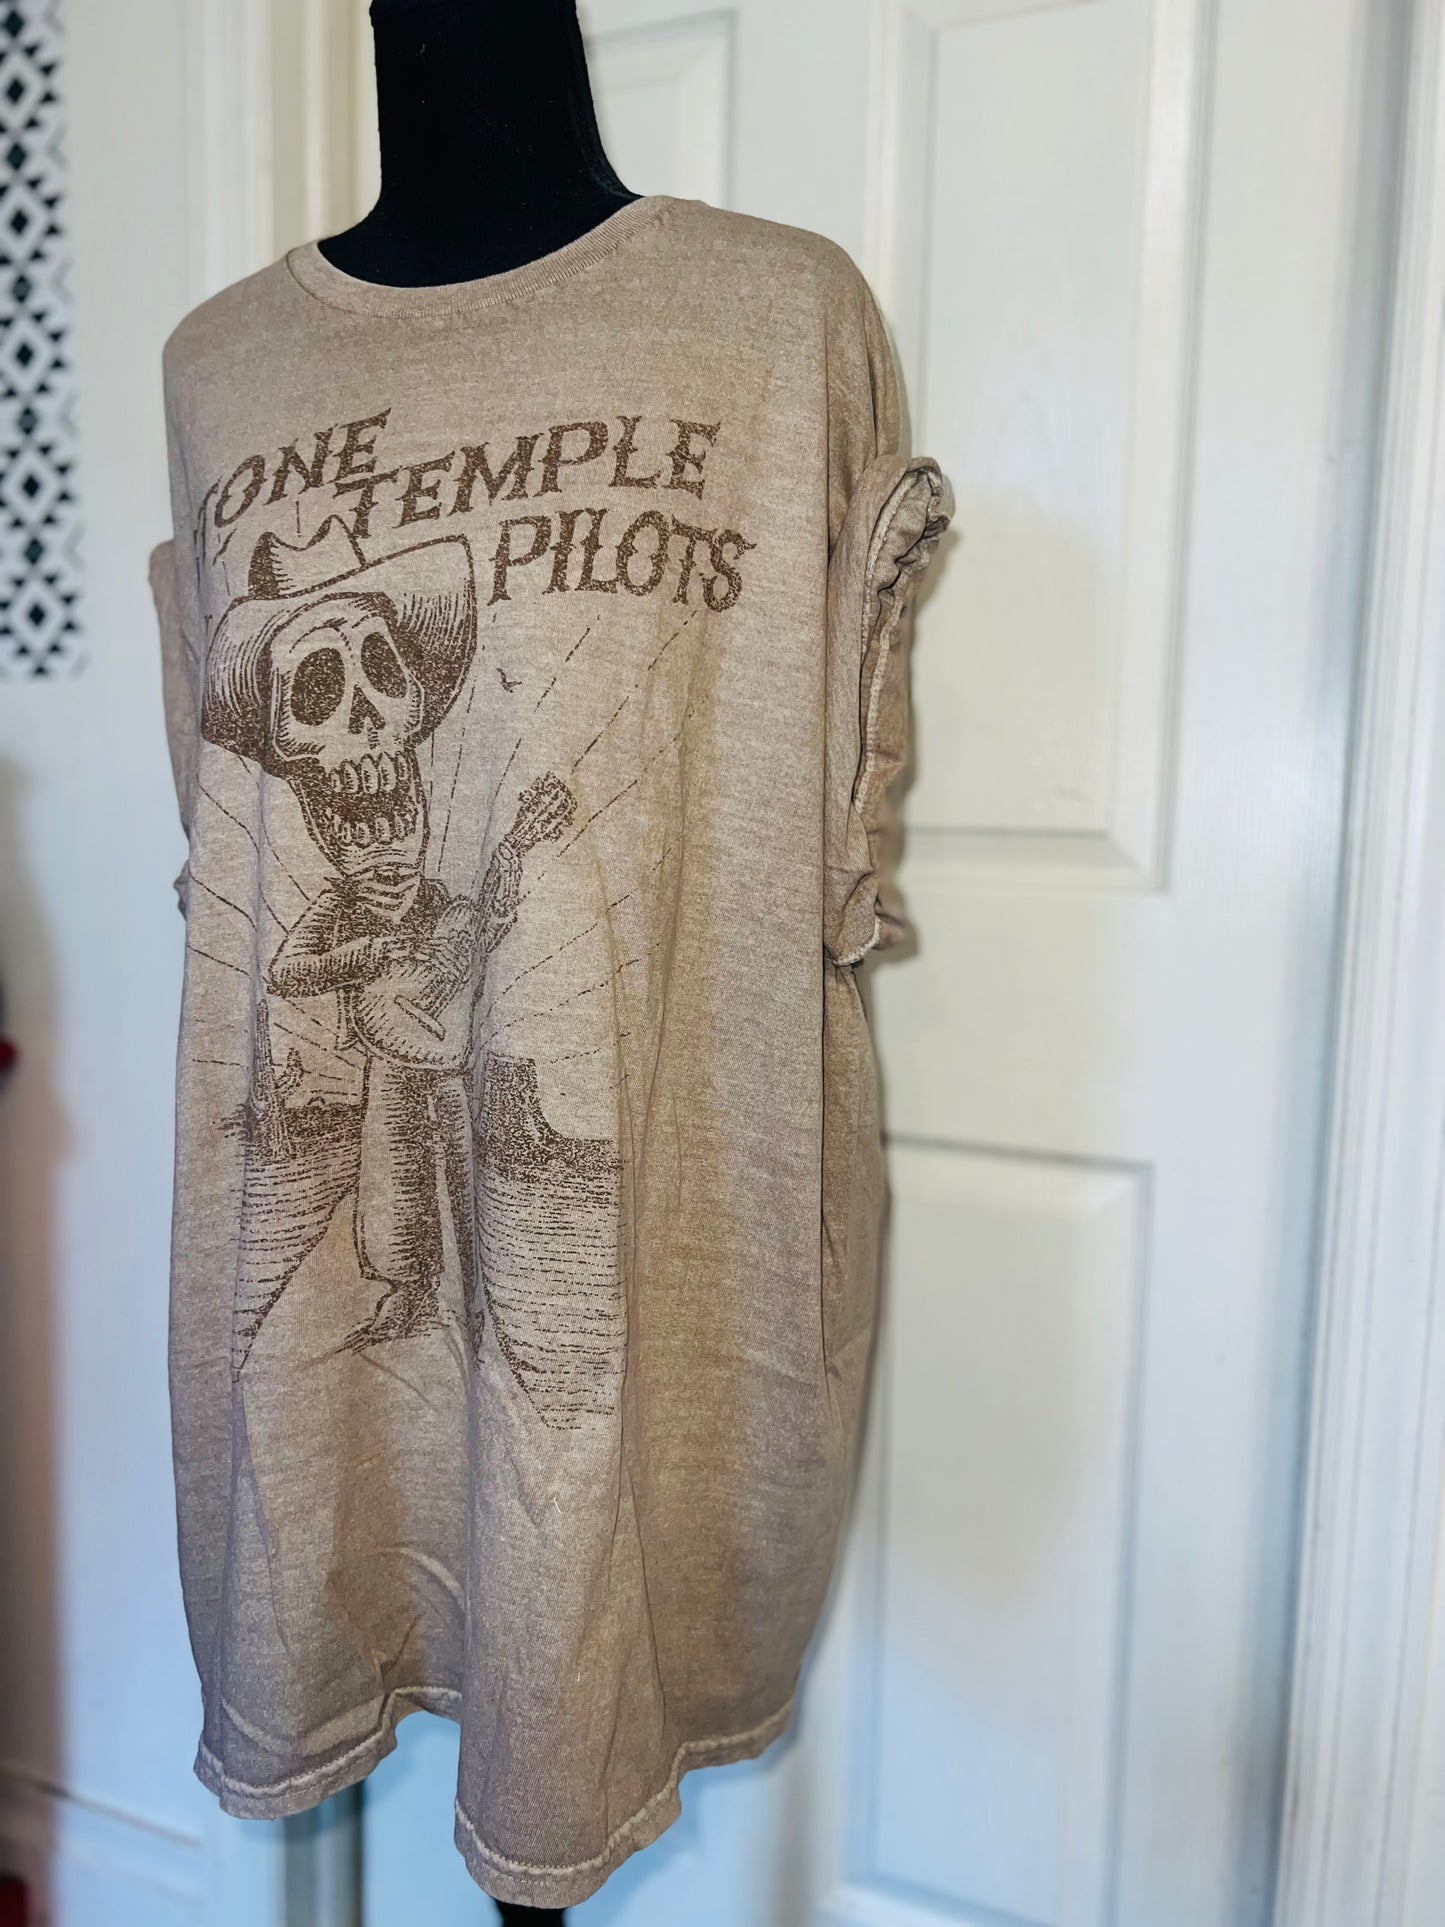 Stone Temple Pilots Oversized Distressed Tee